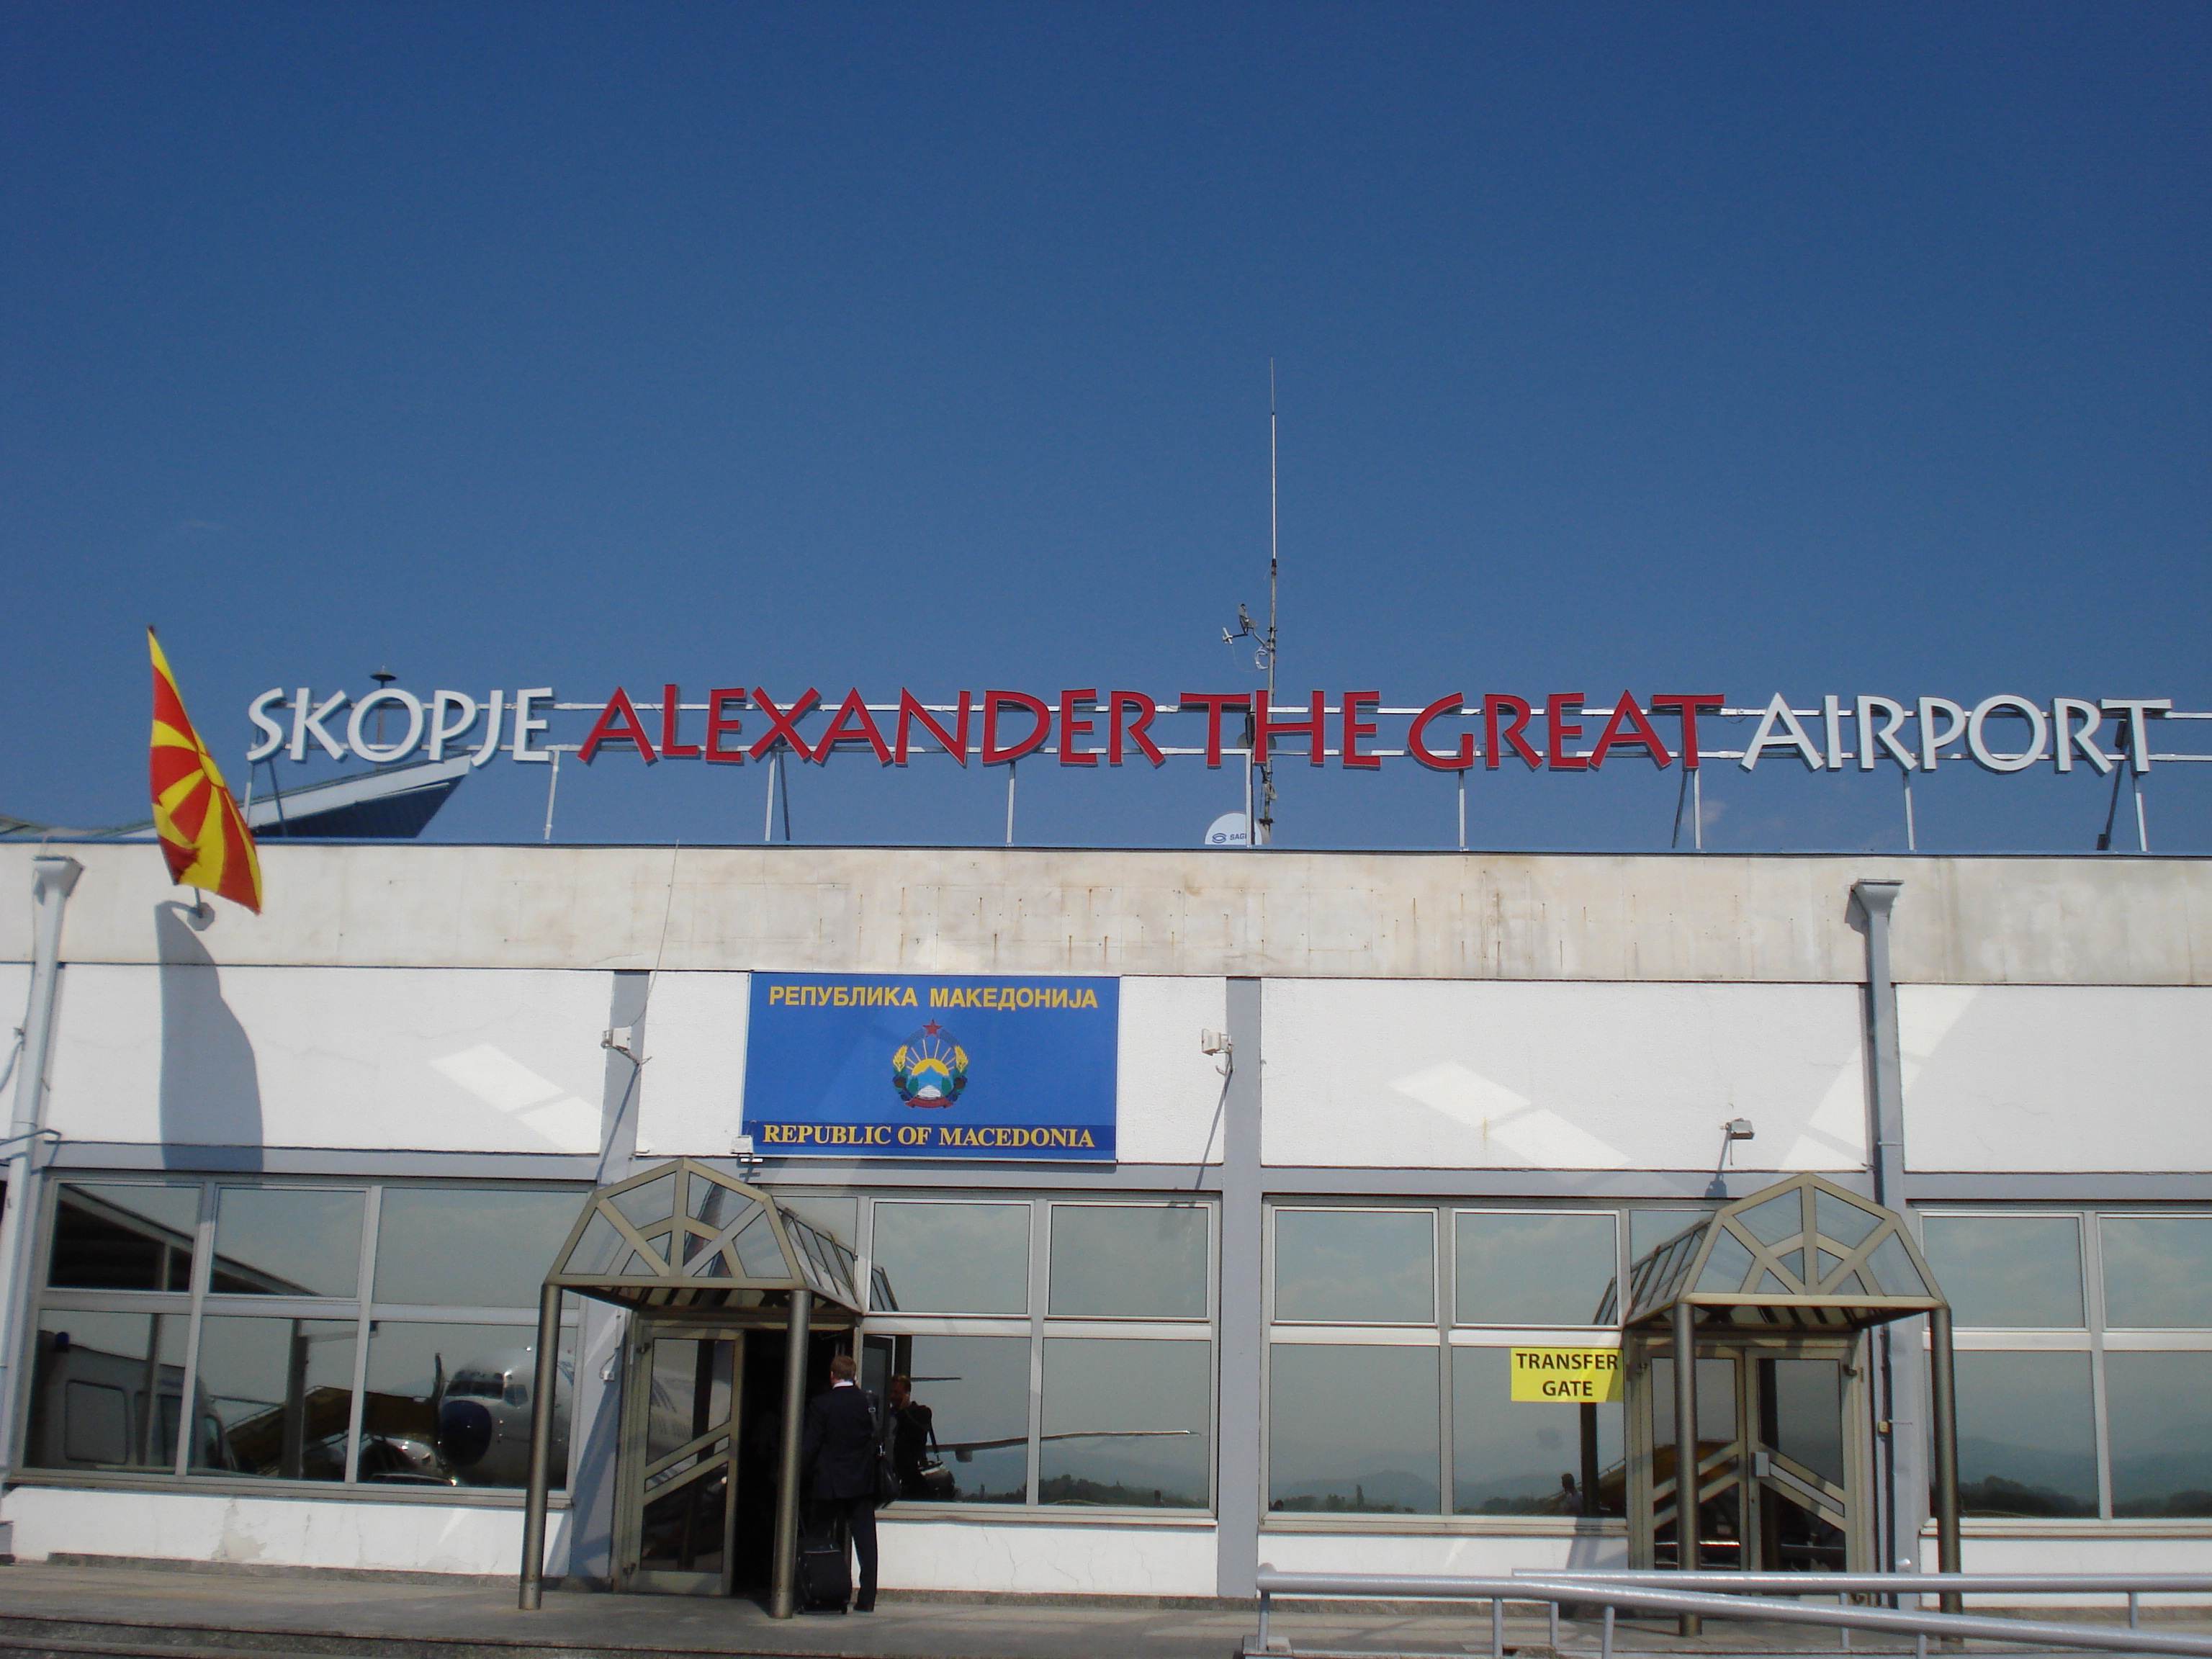 Alexander the Great Airport